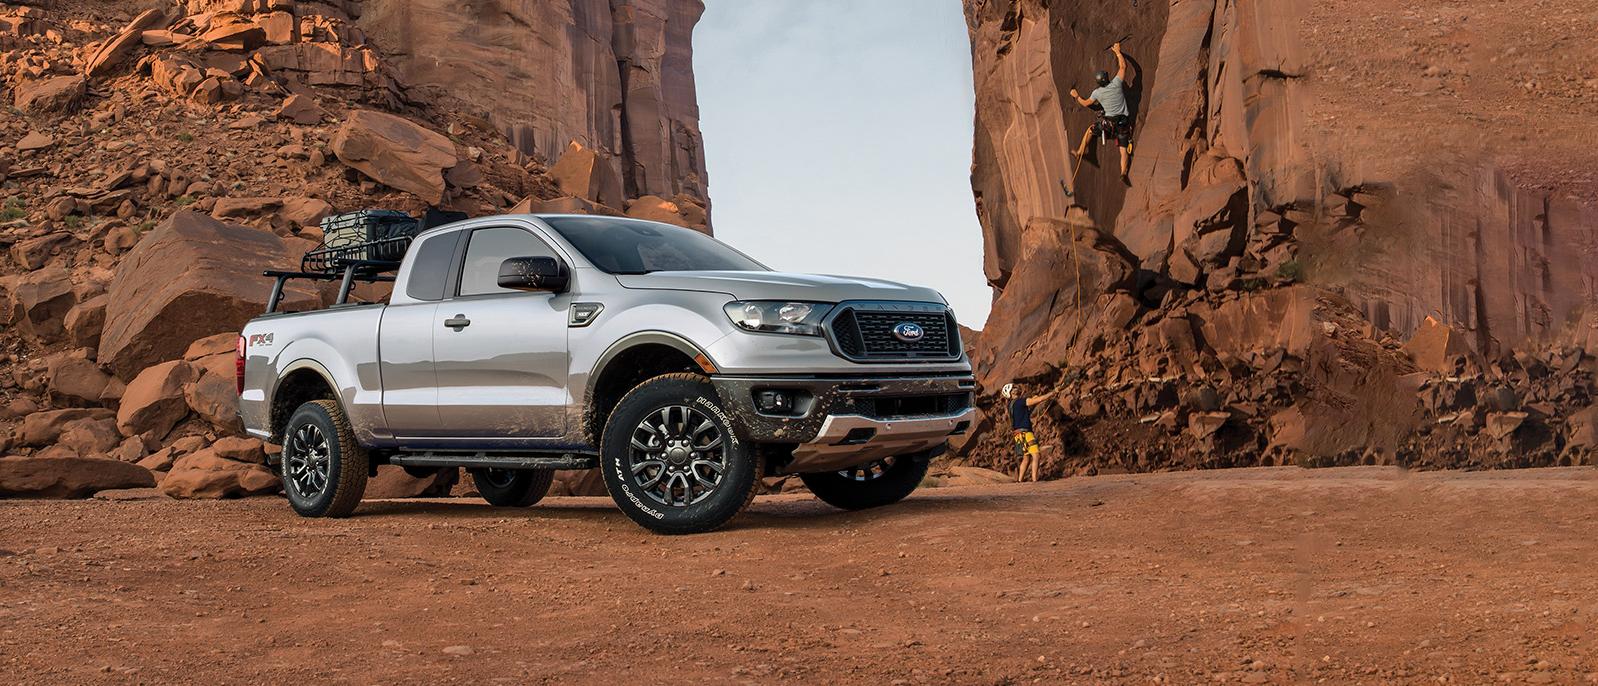 2020 Ford Ranger parked under a cliff.